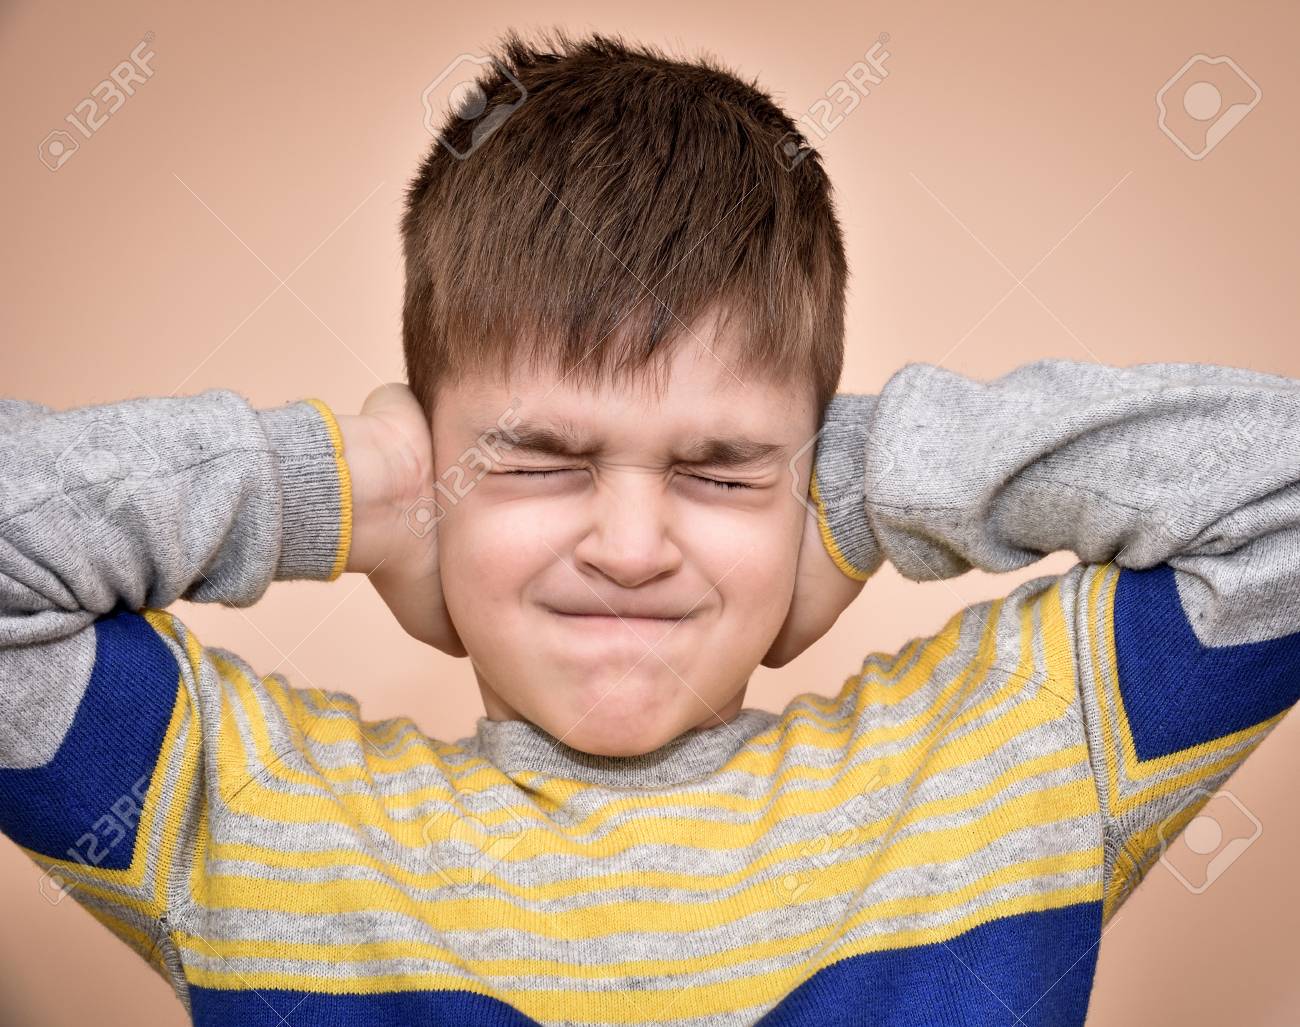 70491323-young-boy-with-closed-eyes-covering-ears-with-hands.jpg